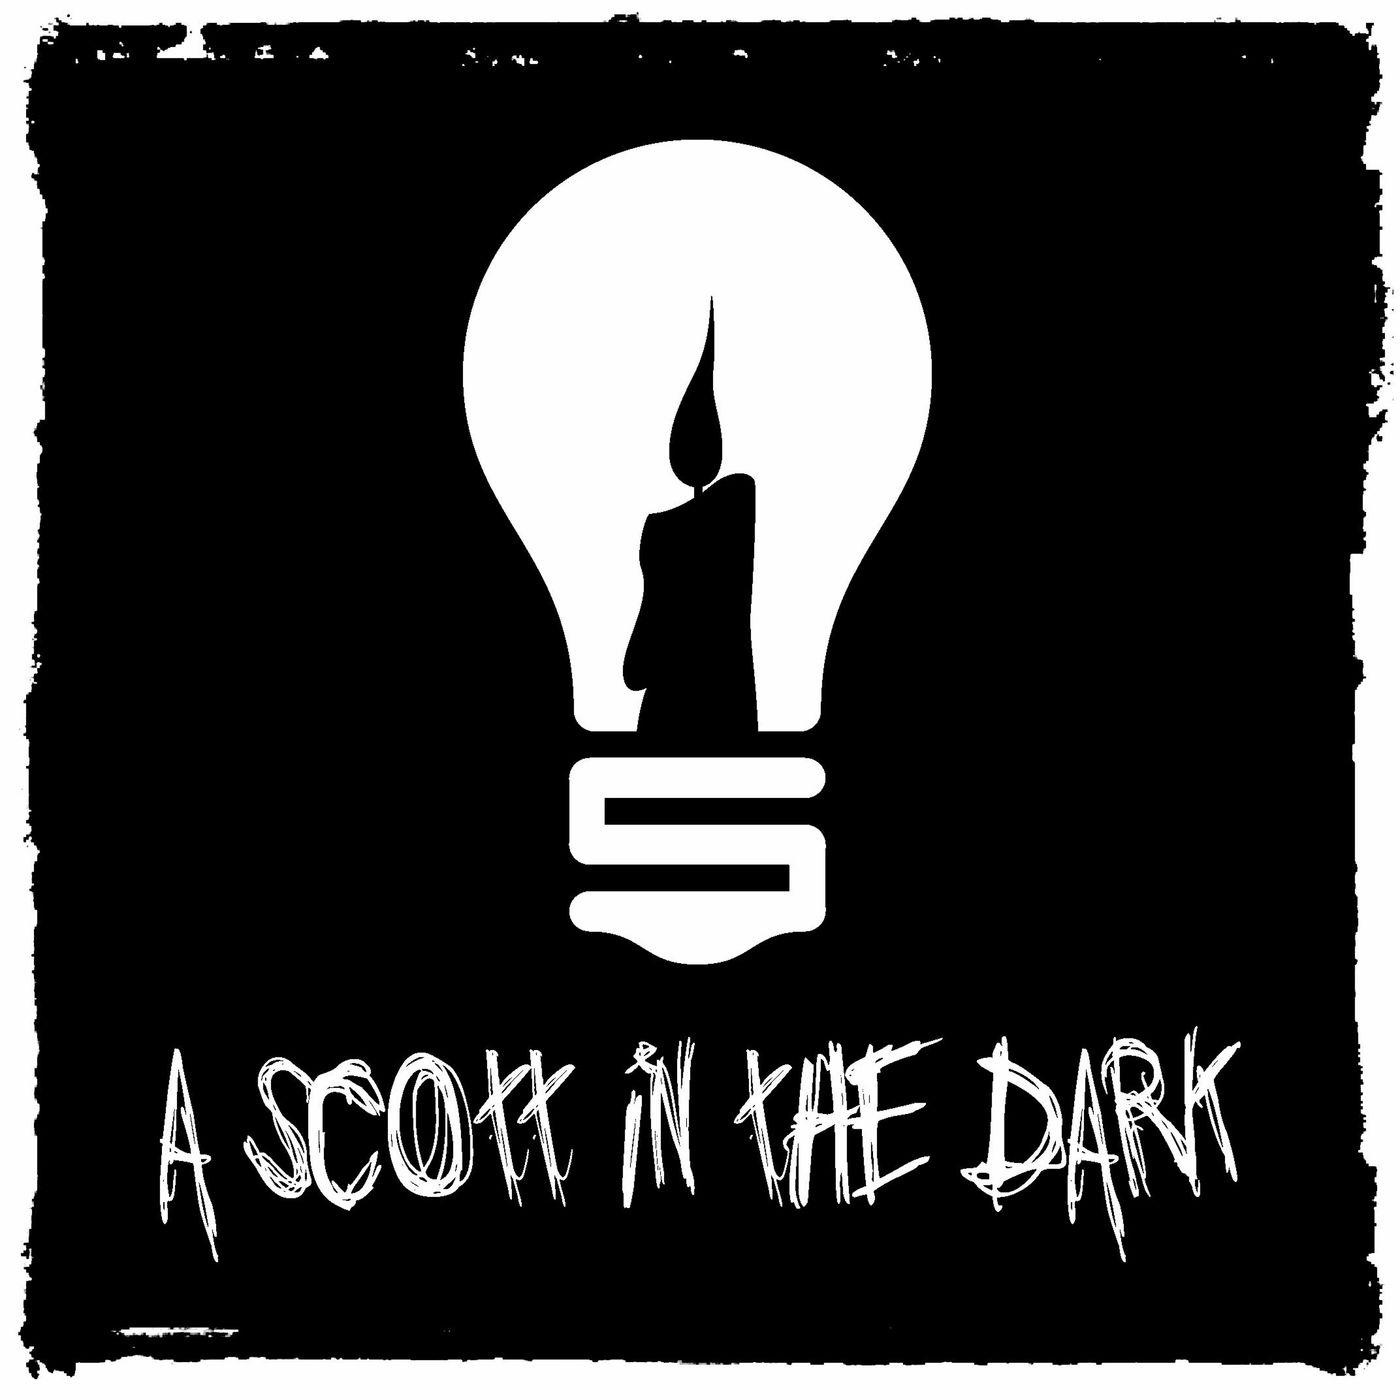 [A Scott in the Dark] Episode 47 - Come Together